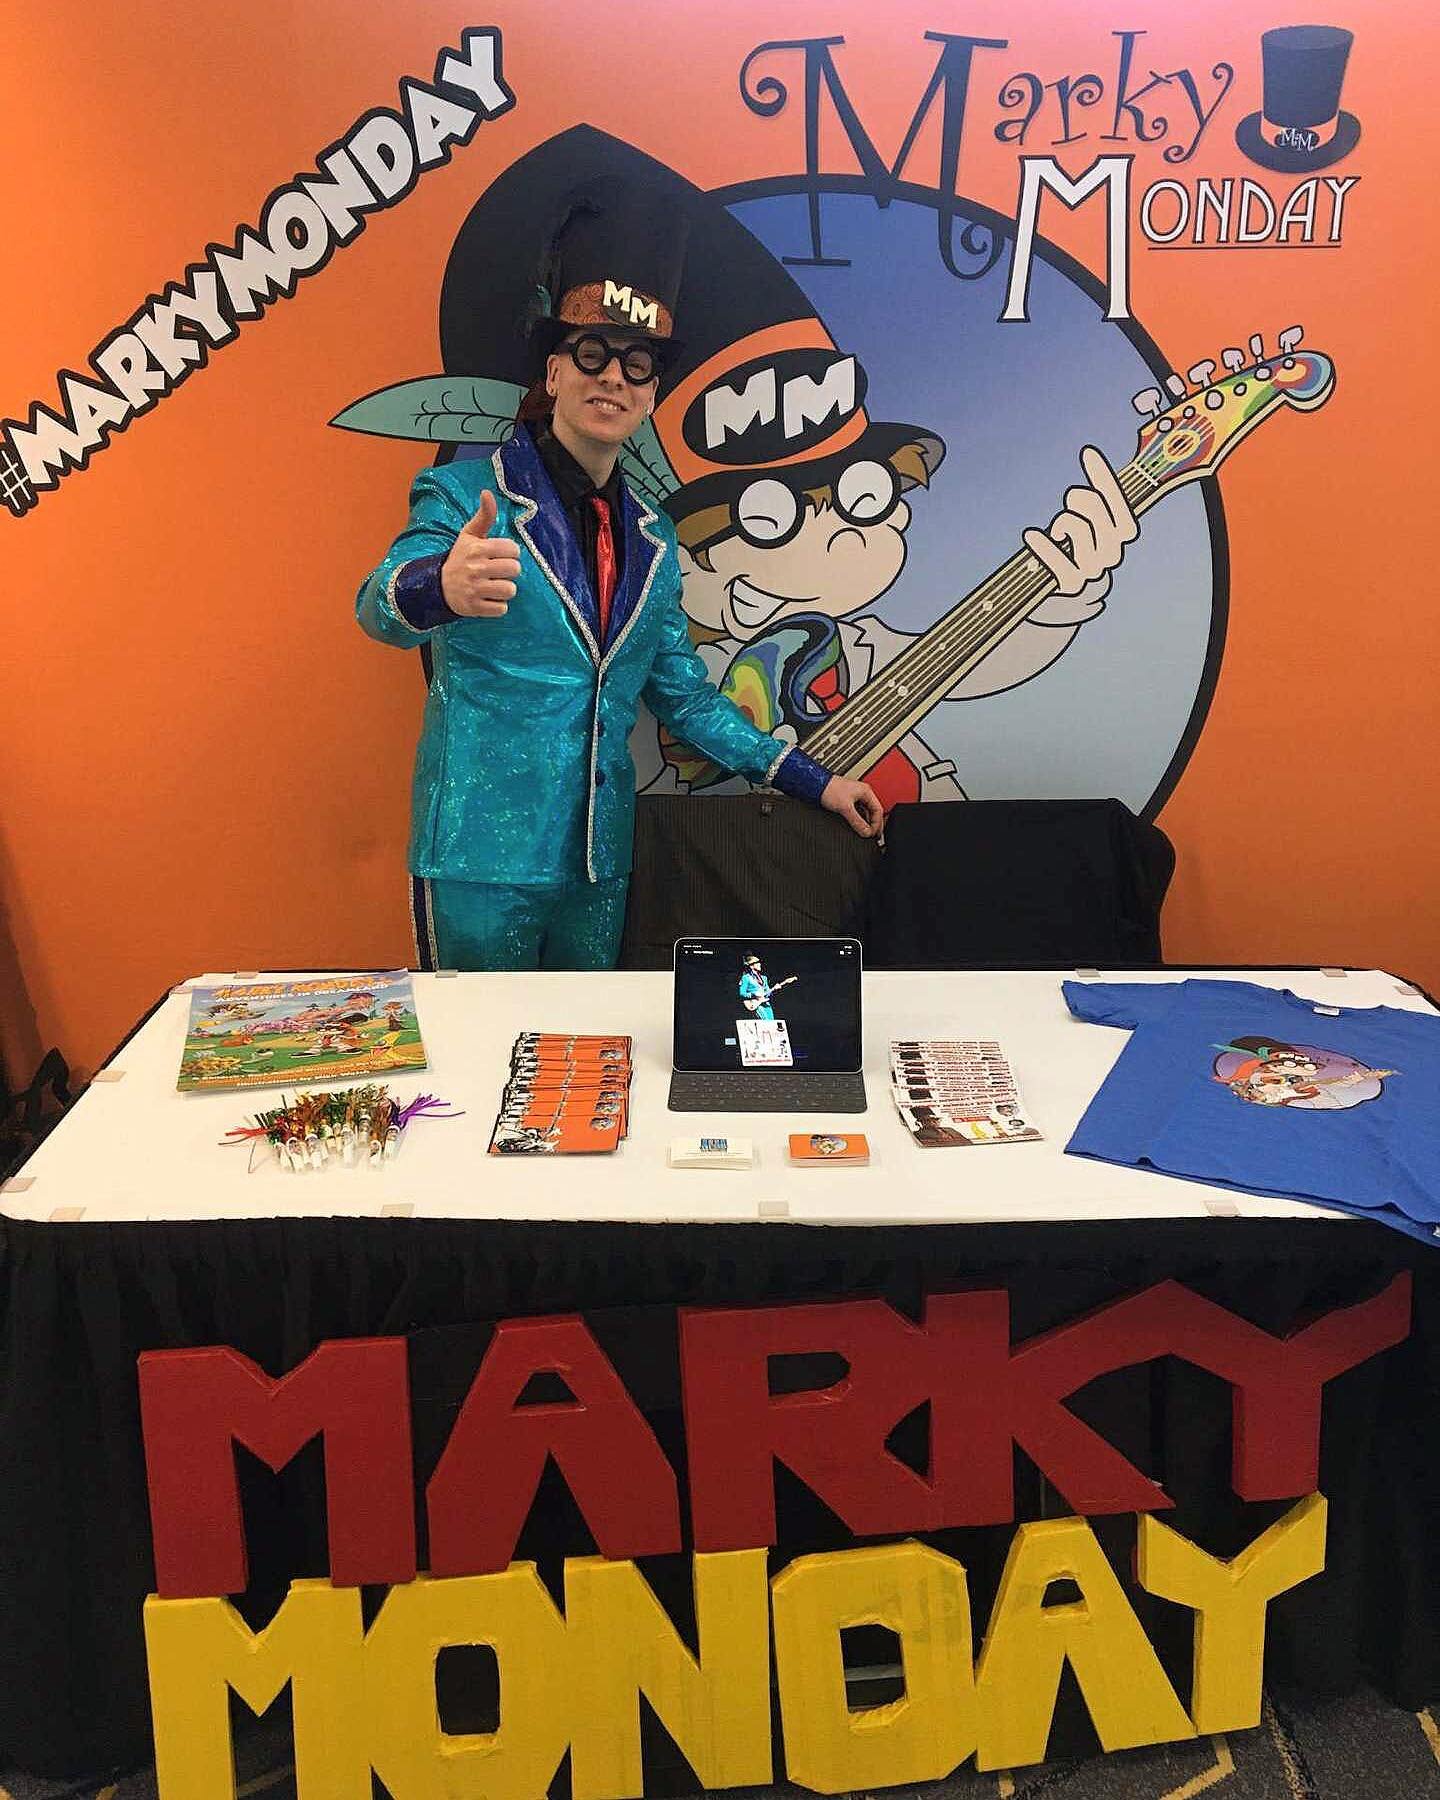 Hey hey! Marky&rsquo;s performing a showcase today for @ontarioagsocieties at 1pm! So excited to be here! #markymonday #booth #performer #entertainer